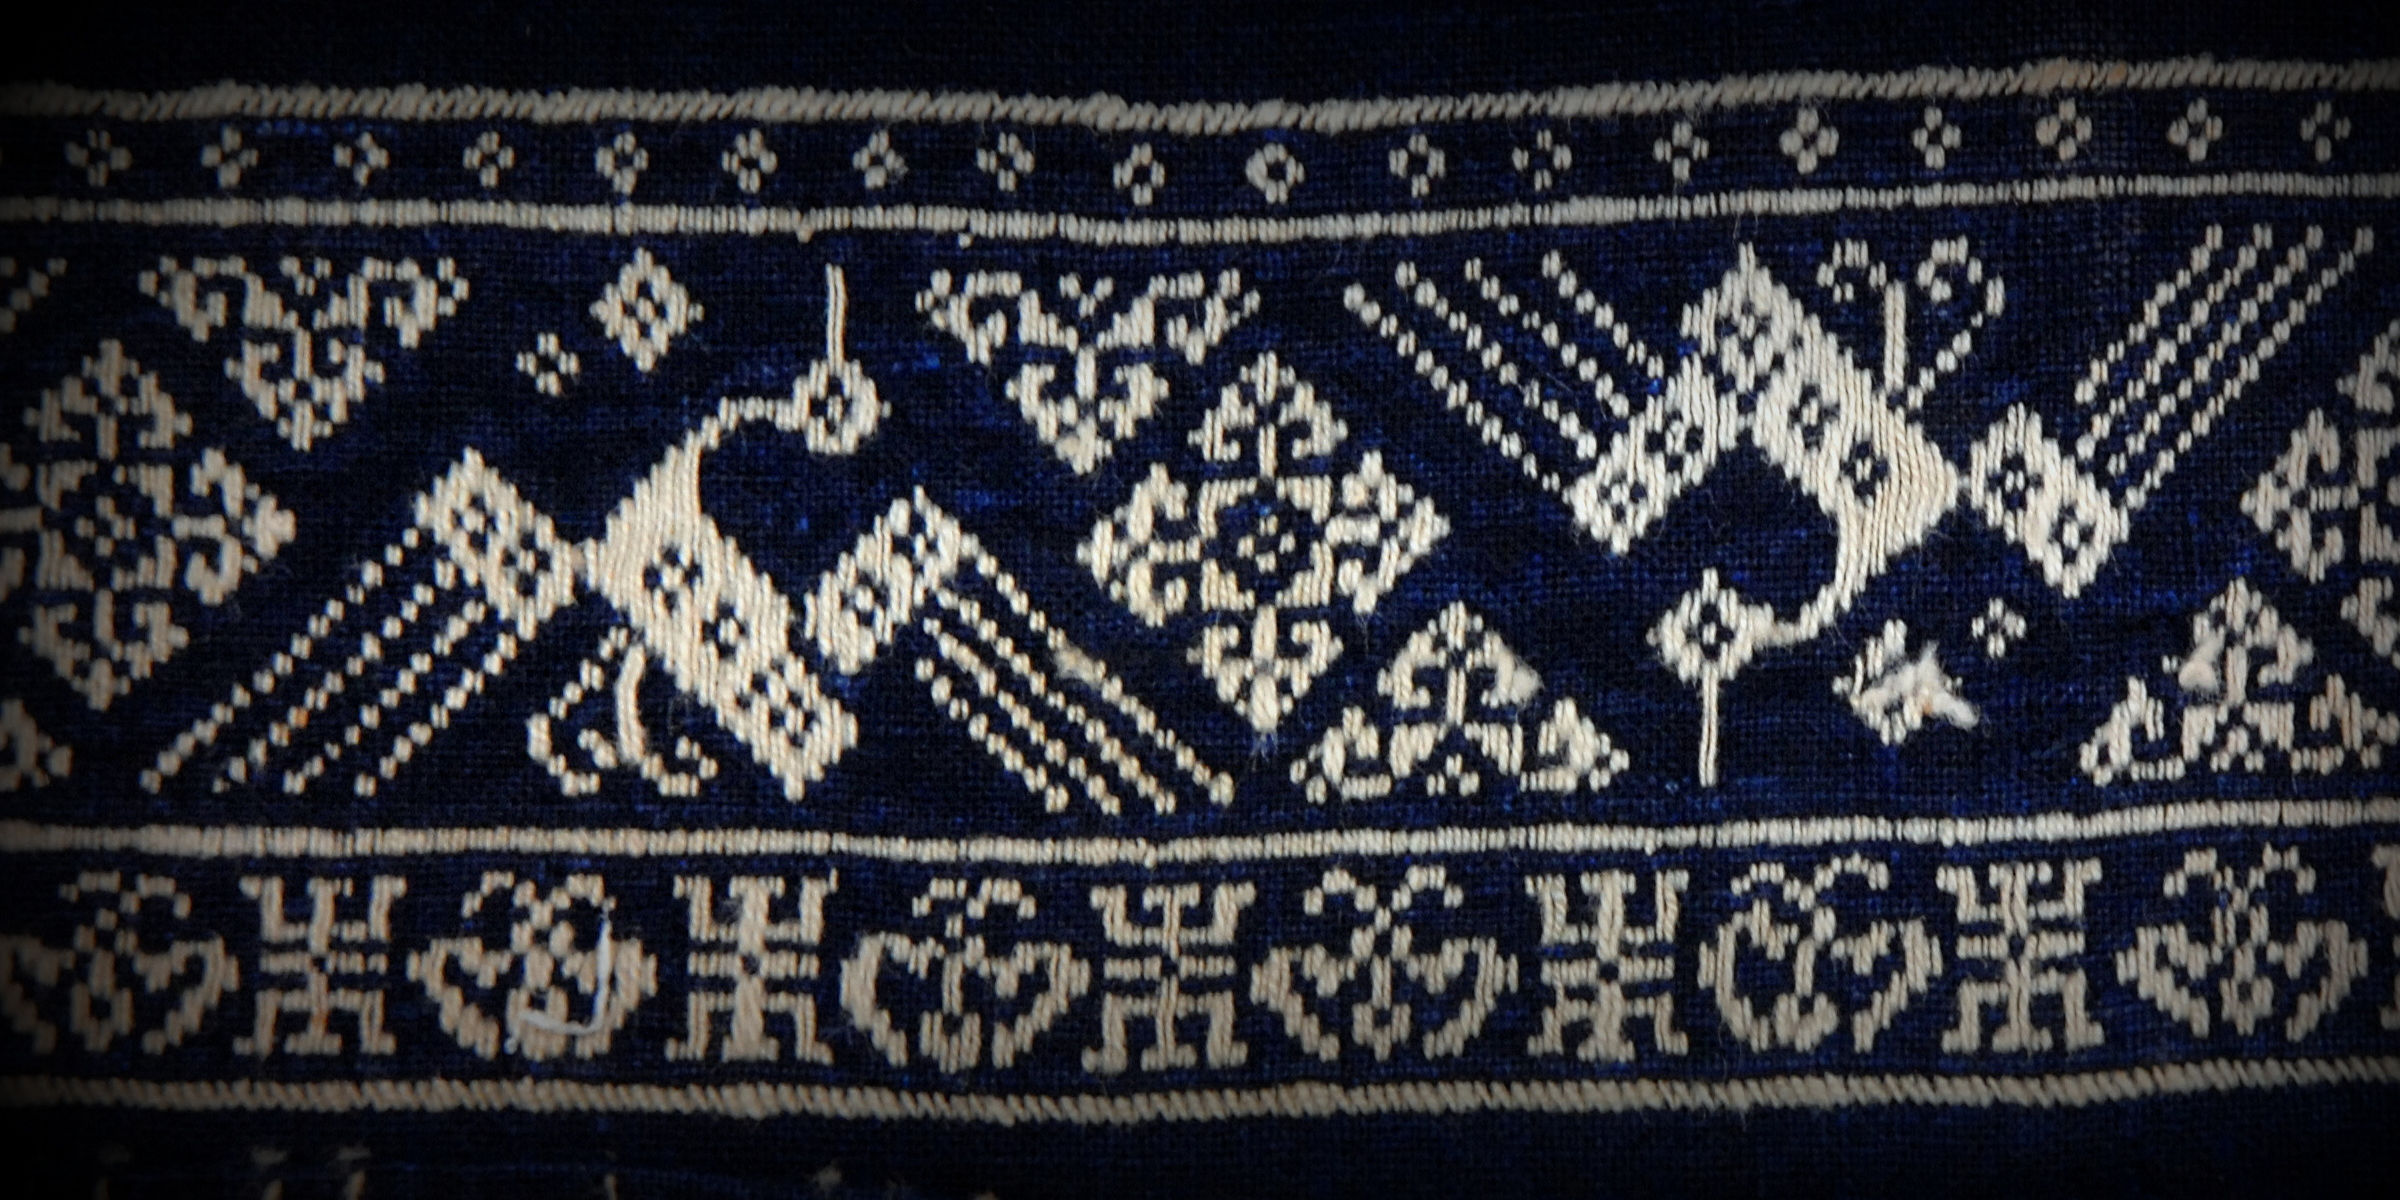 Detail of an embroidered cotton sleeve band, Mianyang, Sichuan, China. Collected by Carl Schuster. Catalog Number 2724.234232. © The Field Museum.